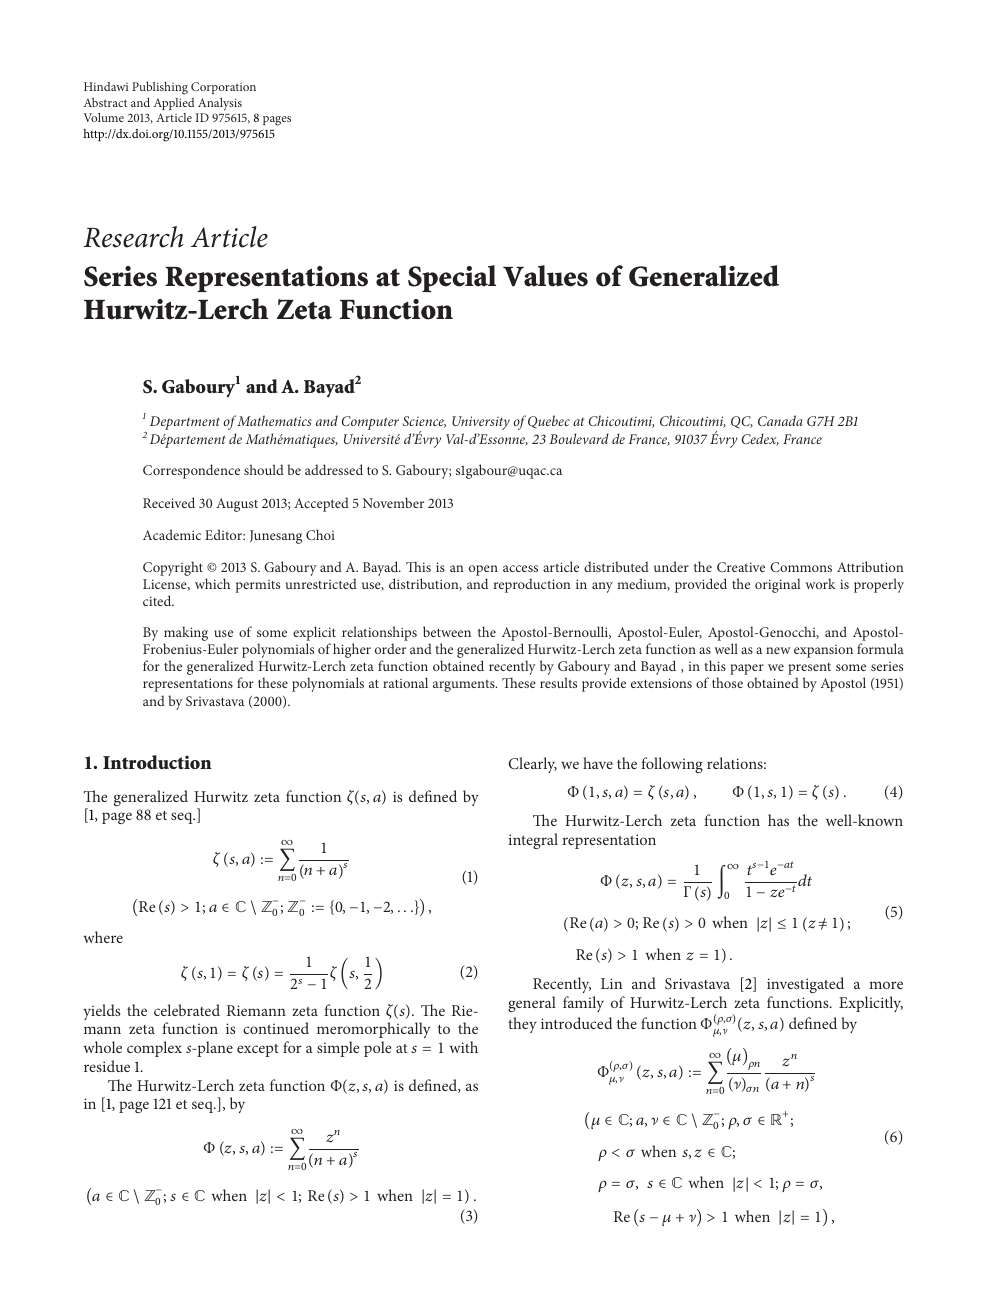 Series Representations At Special Values Of Generalized Hurwitz Lerch Zeta Function Topic Of Research Paper In Mathematics Download Scholarly Article Pdf And Read For Free On Cyberleninka Open Science Hub